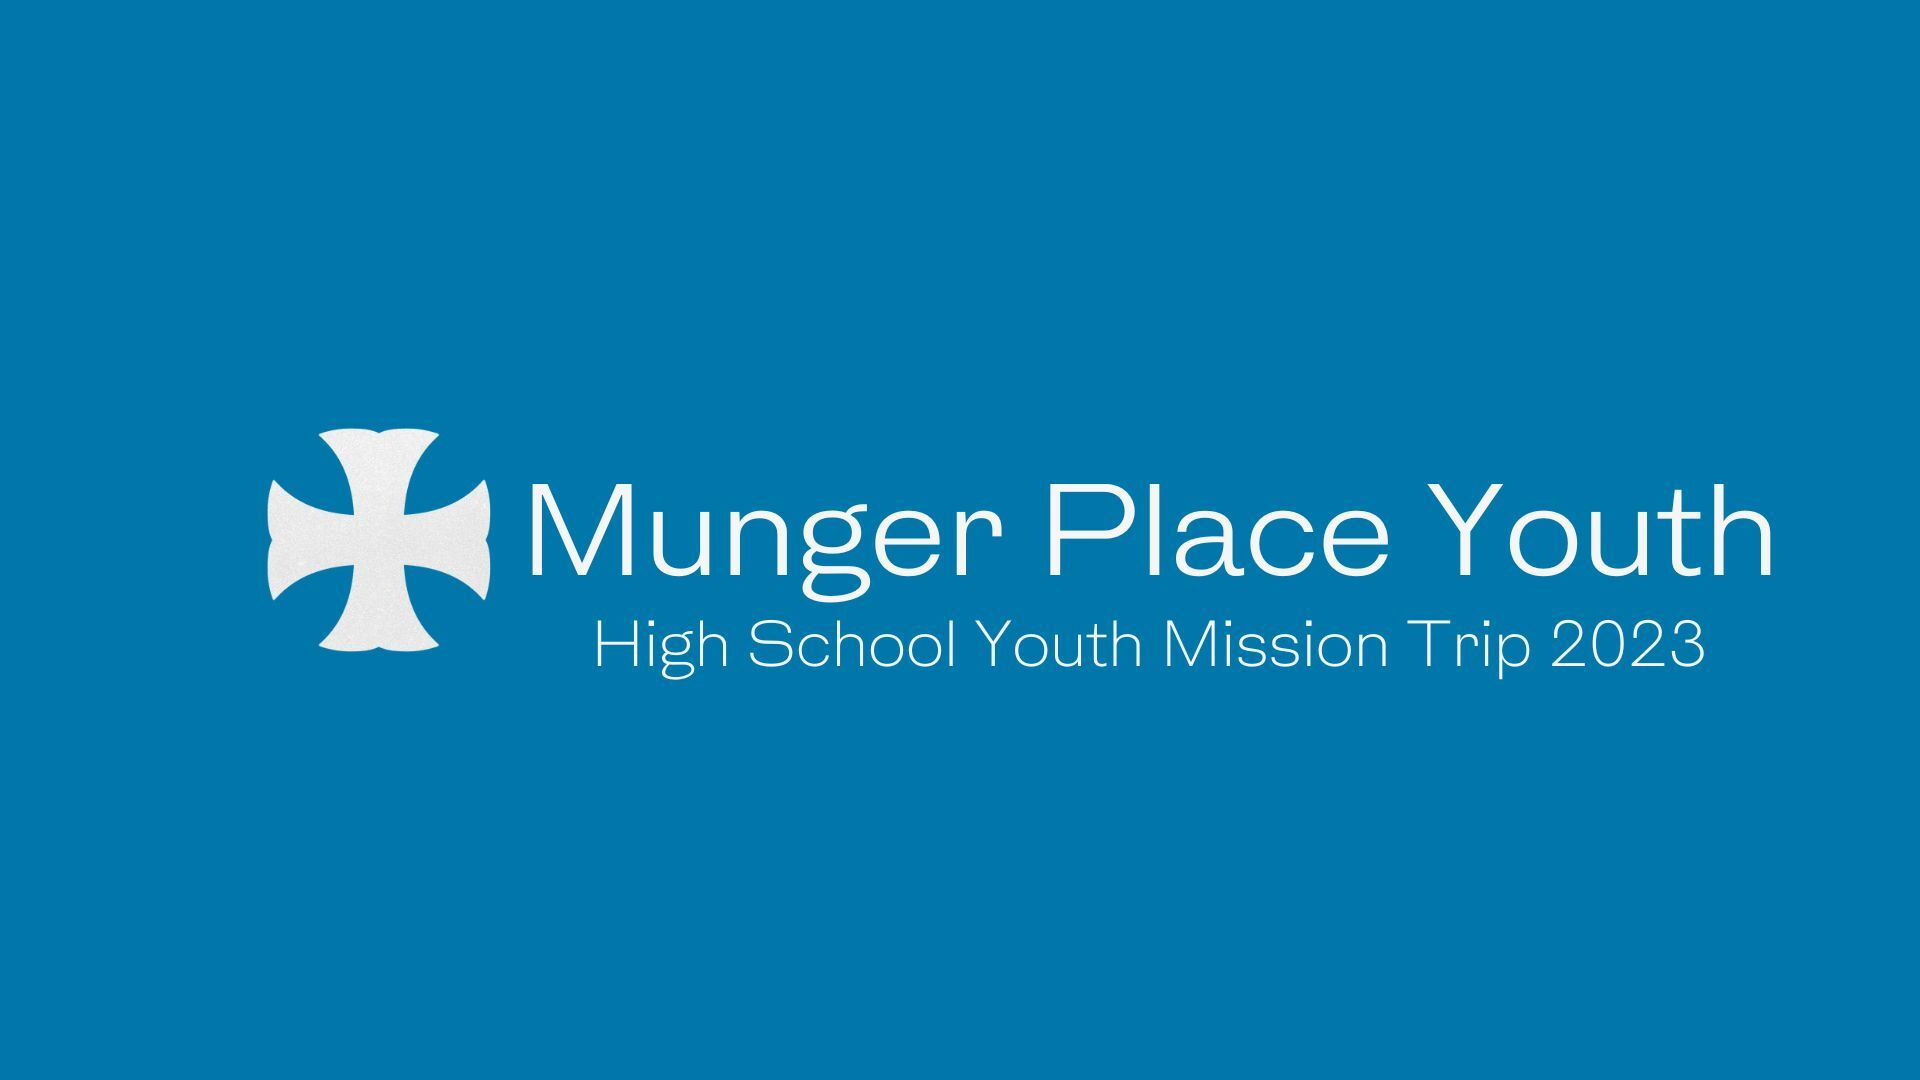 Munger Place Youth